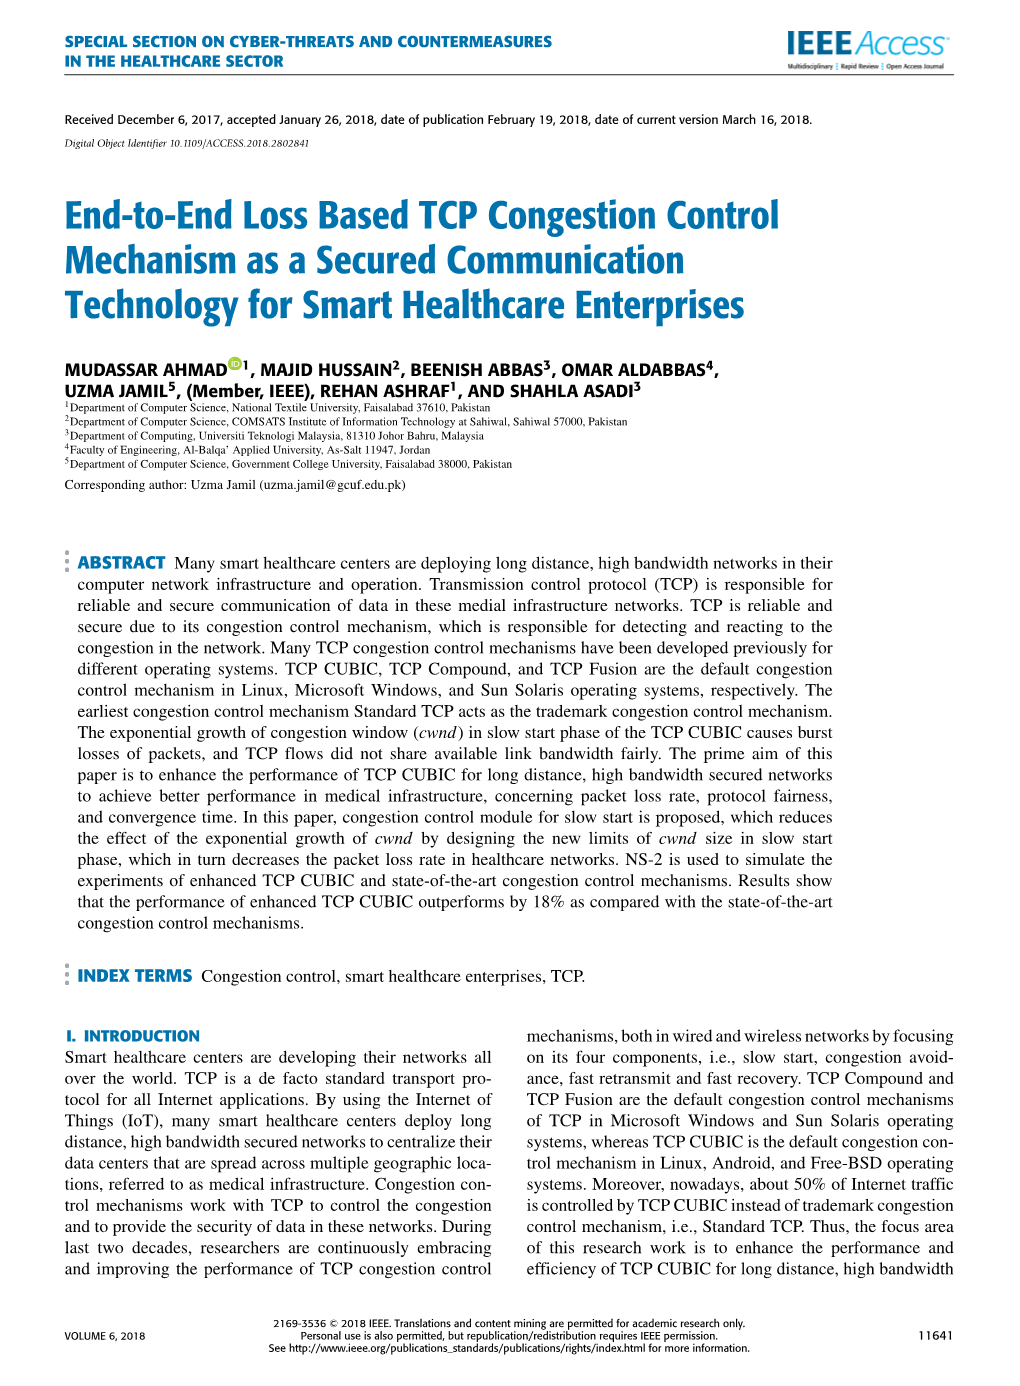 End-To-End Loss Based TCP Congestion Control Mechanism As a Secured Communication Technology for Smart Healthcare Enterprises